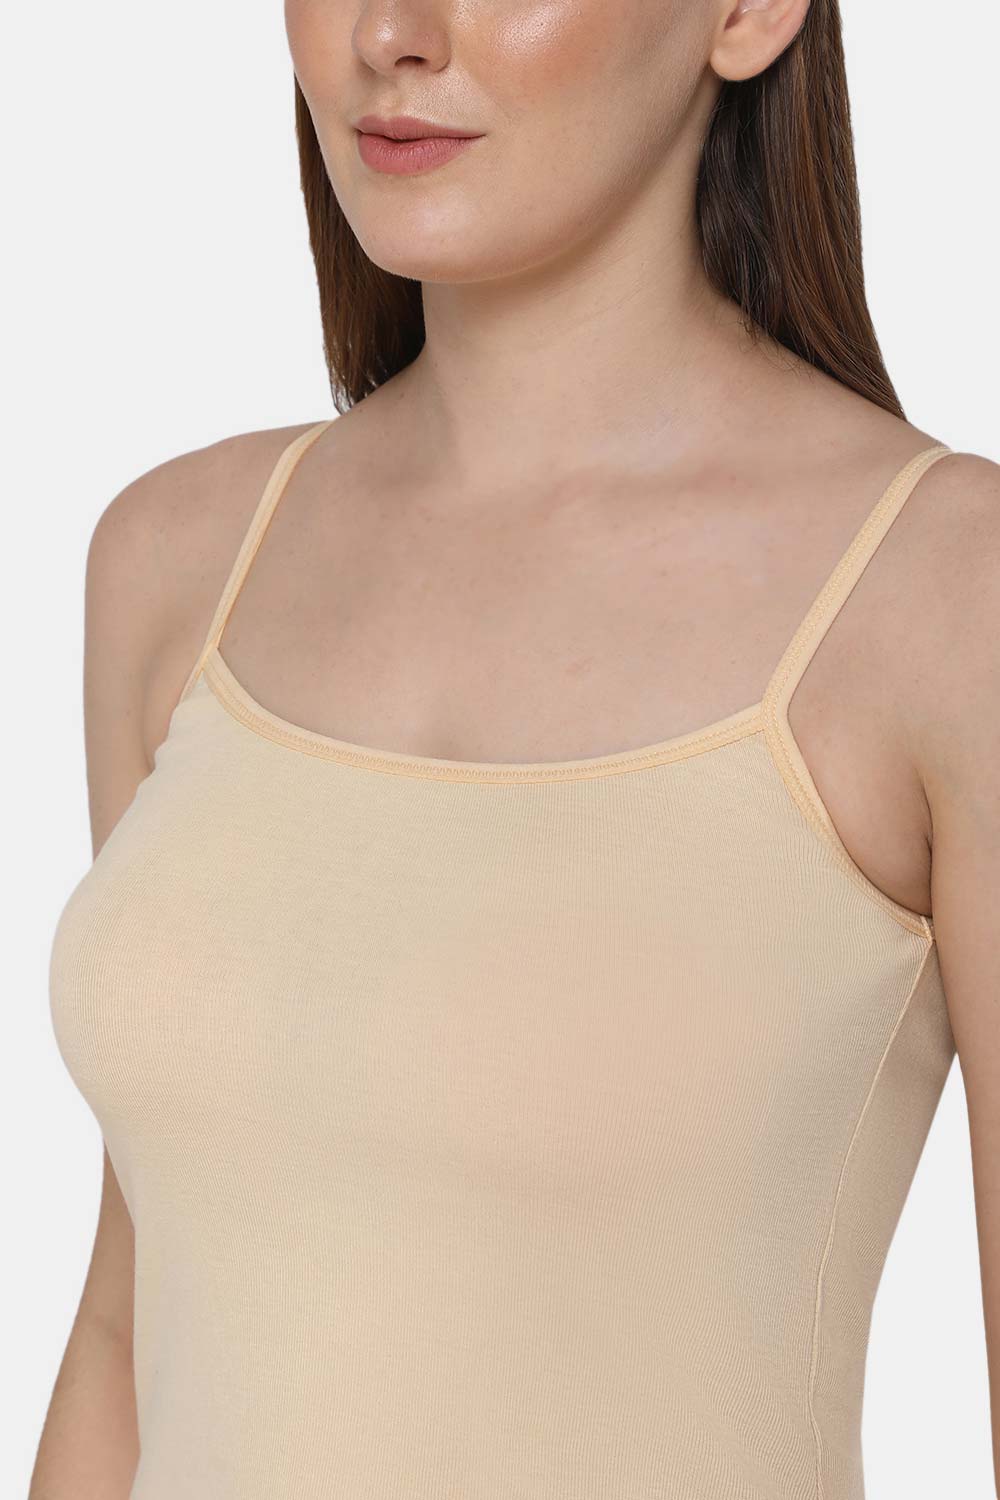 Intimacy Camisole-Slip Special Combo Pack - In02 - Pack of 2 - C01